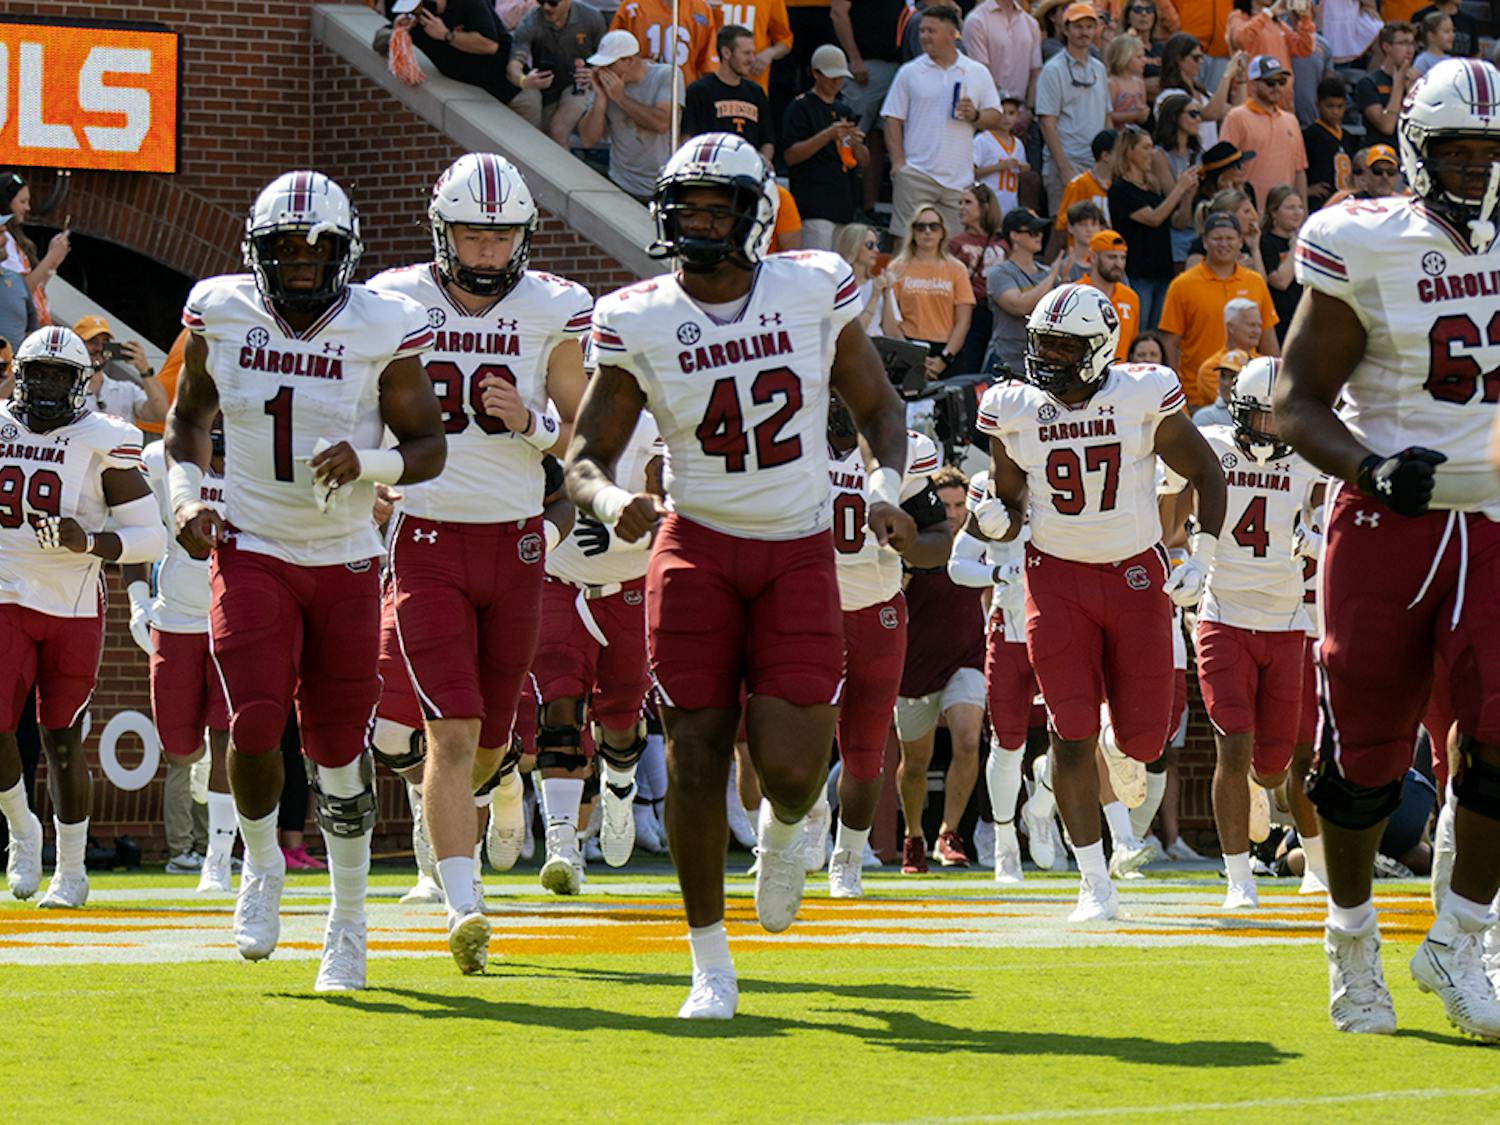 The Gamecocks run out onto the field of Neyland Stadium before facing off the Volunteers on Oct. 9, 2021.
